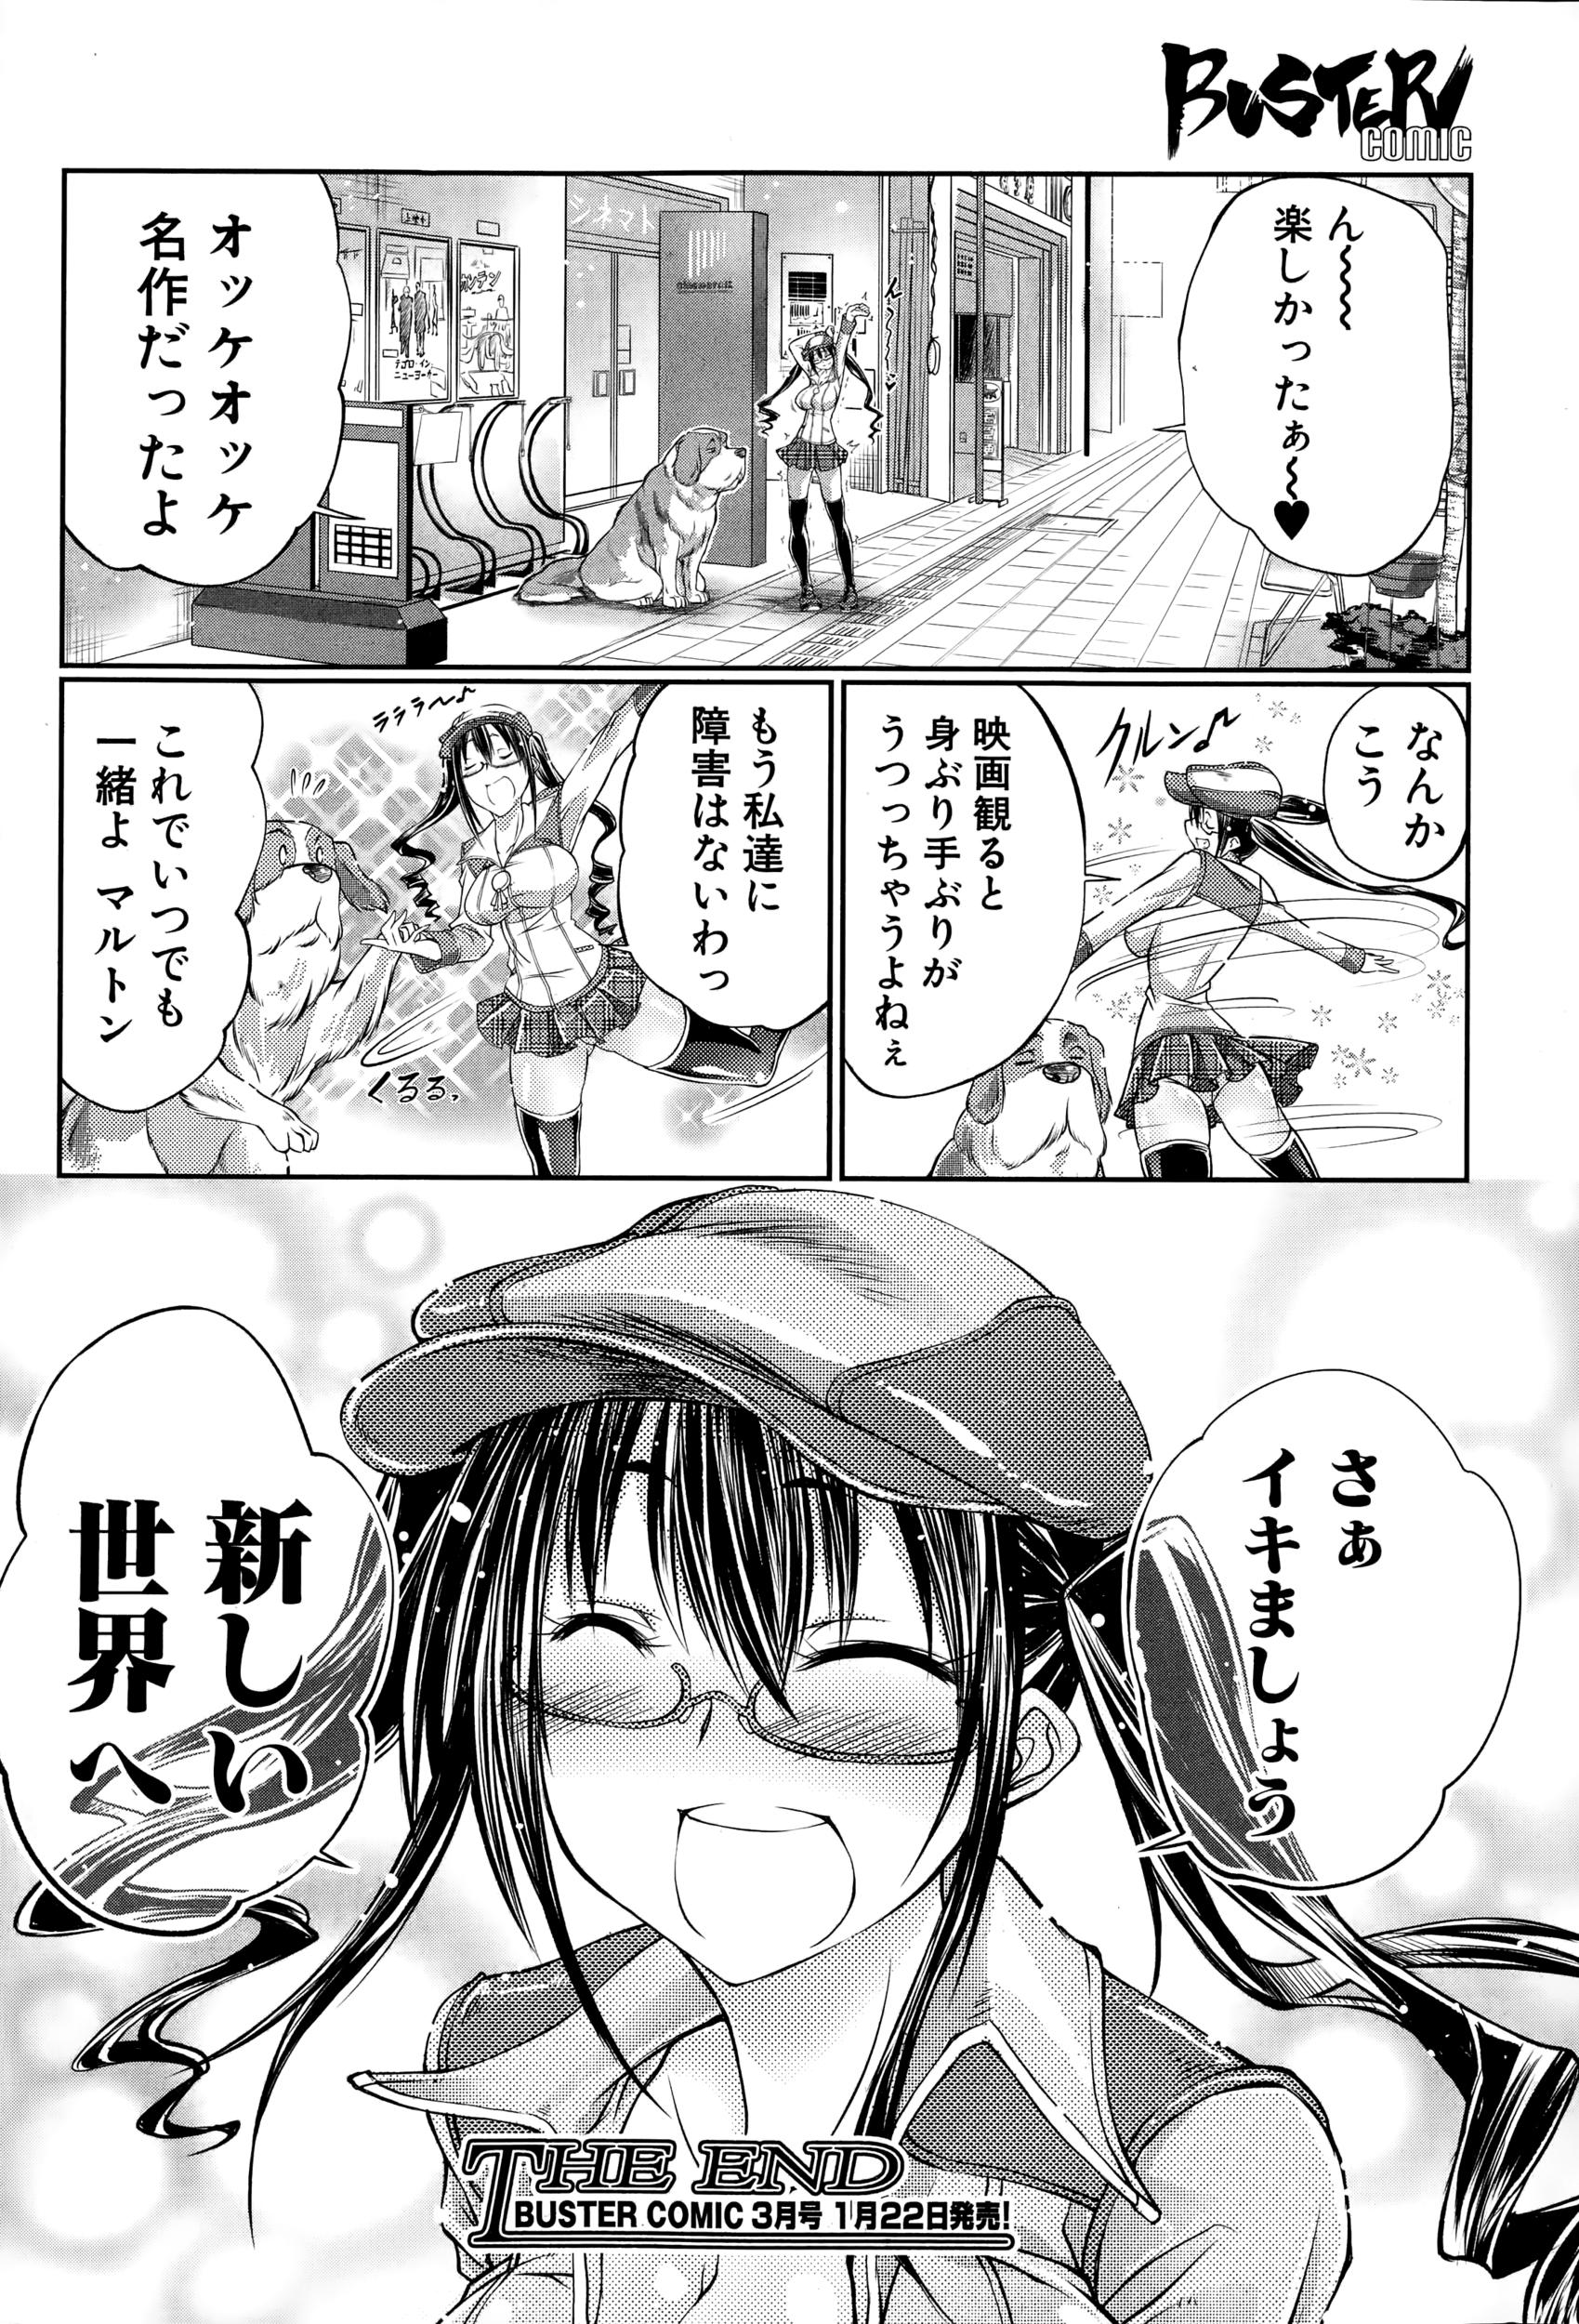 BUSTER COMIC 2015-01 139